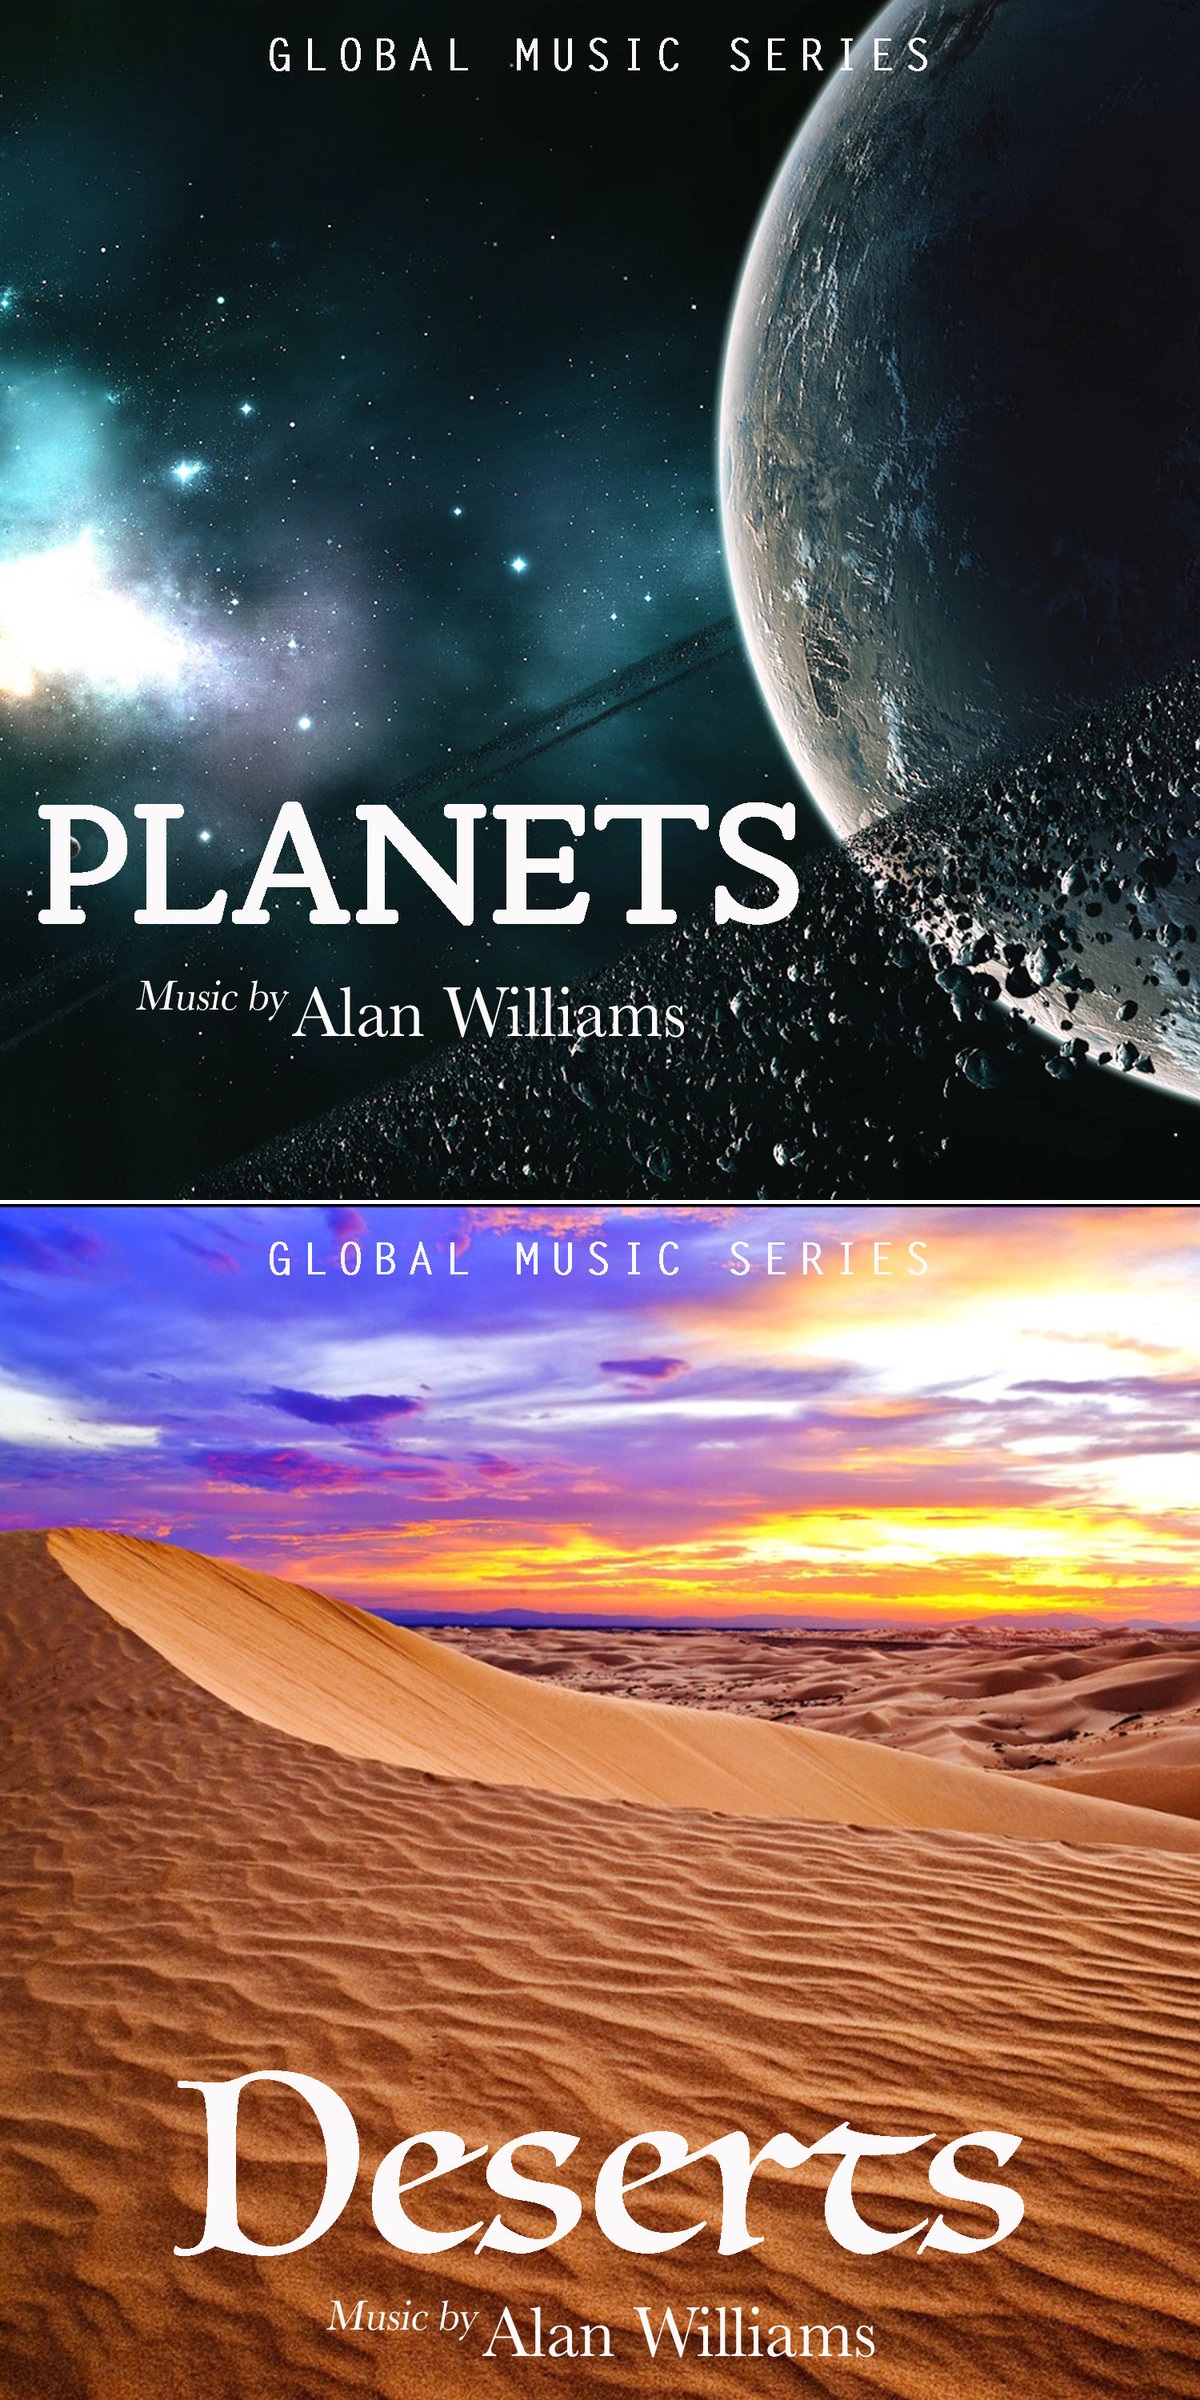 Planets and Deserts